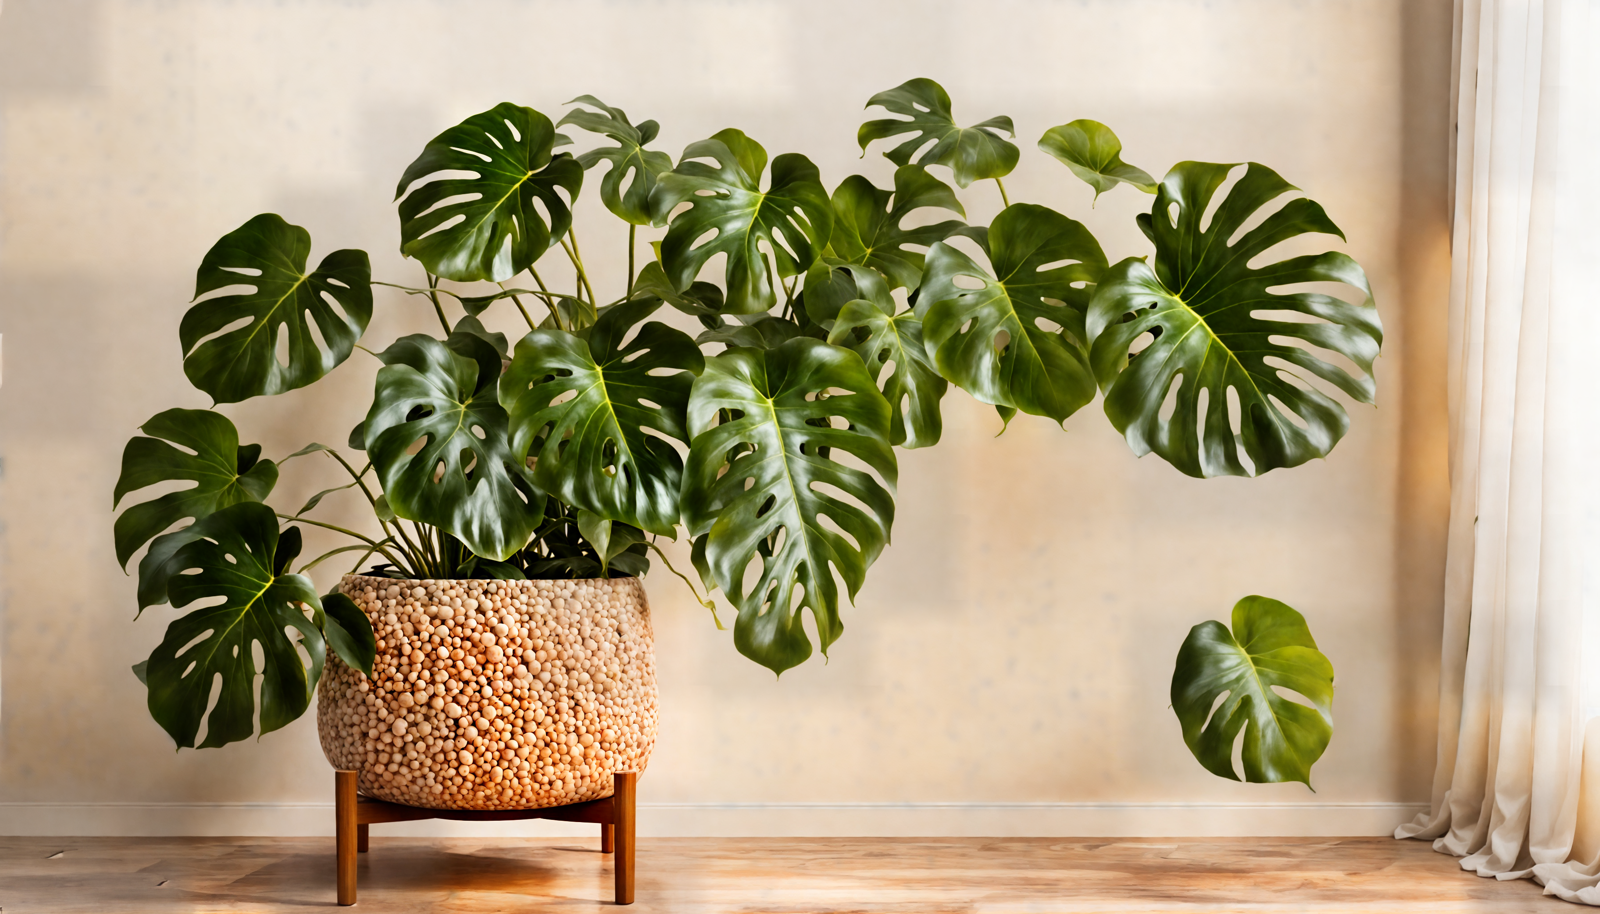 Monstera deliciosa in a planter on a wood floor, with clear lighting and neutral decor.